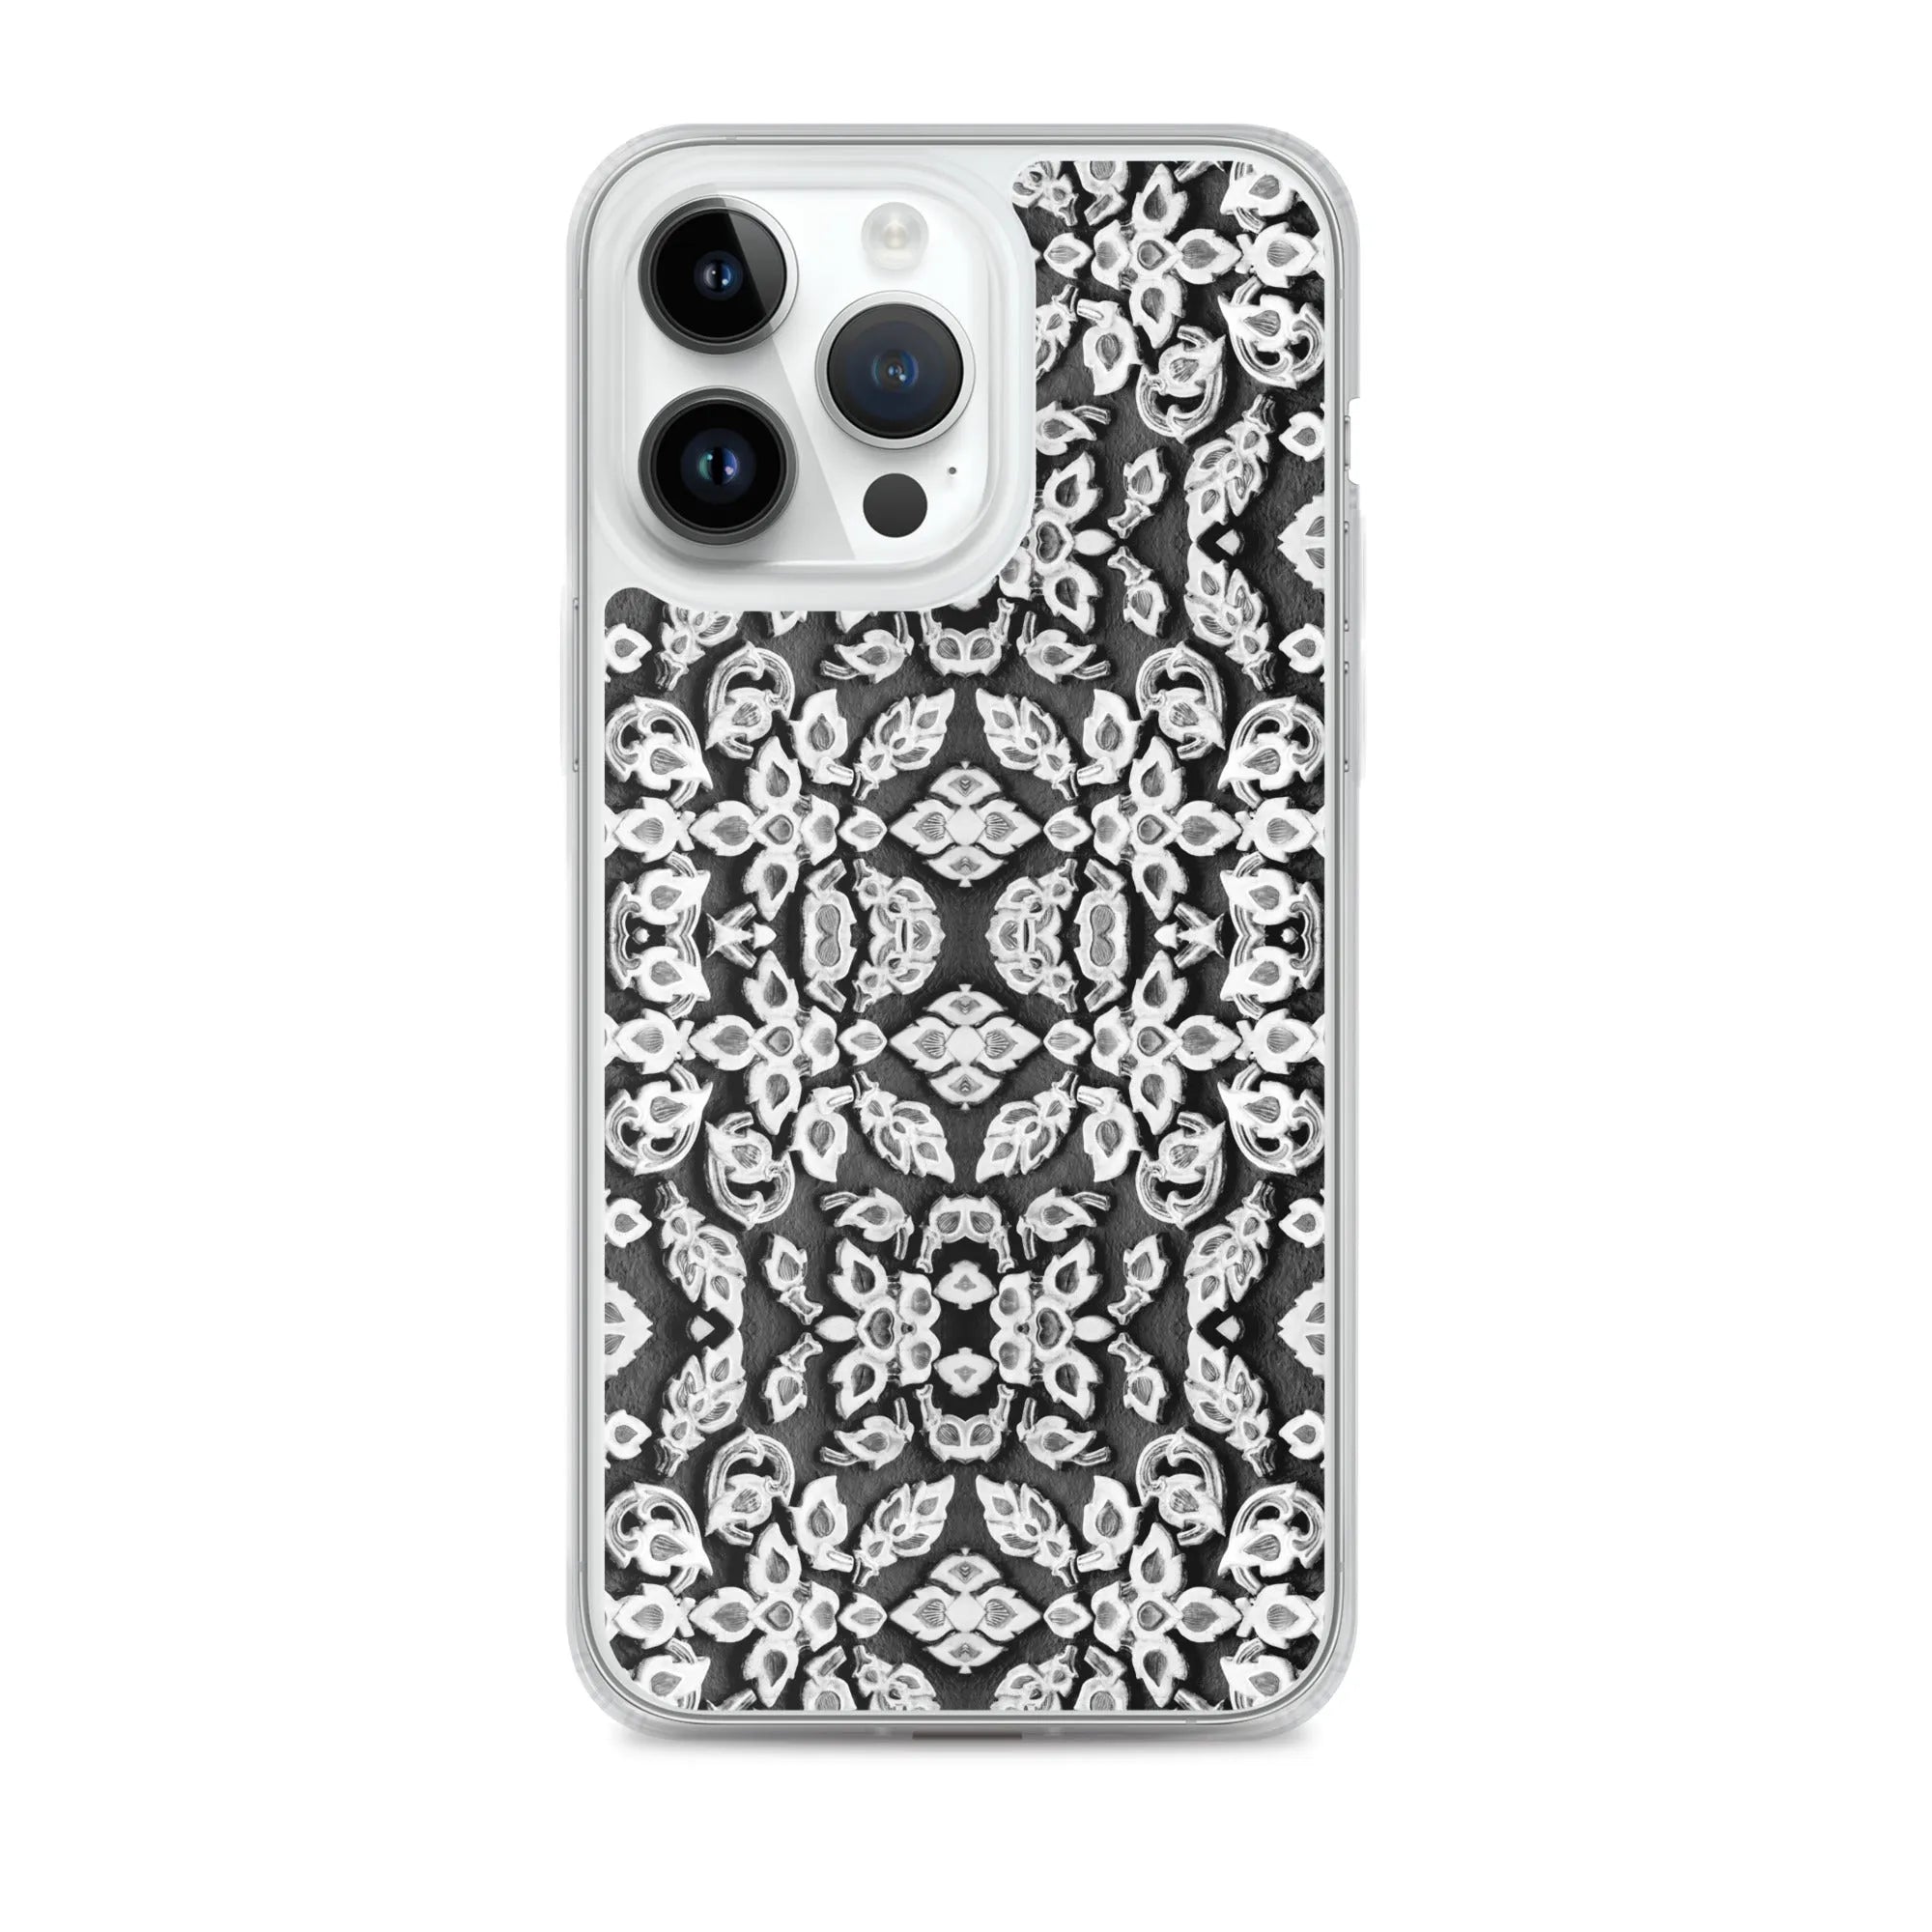 Entering Ayodhya Pattern Iphone Case - Black And White - Iphone 14 Pro Max - Mobile Phone Cases - Aesthetic Art